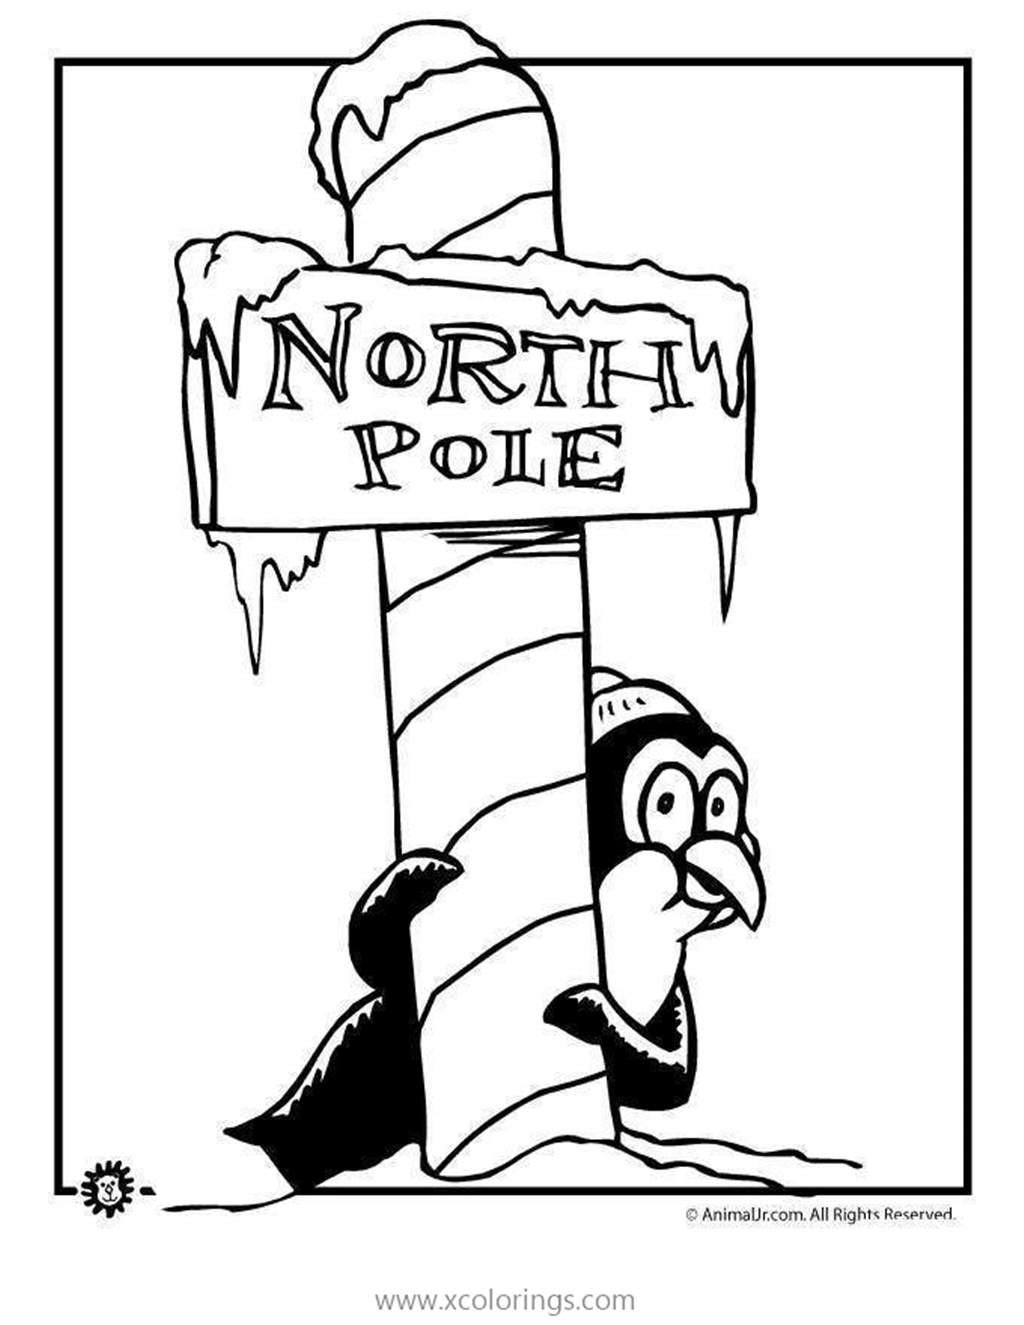 Free Penguin At North Pole Coloring Pages printable